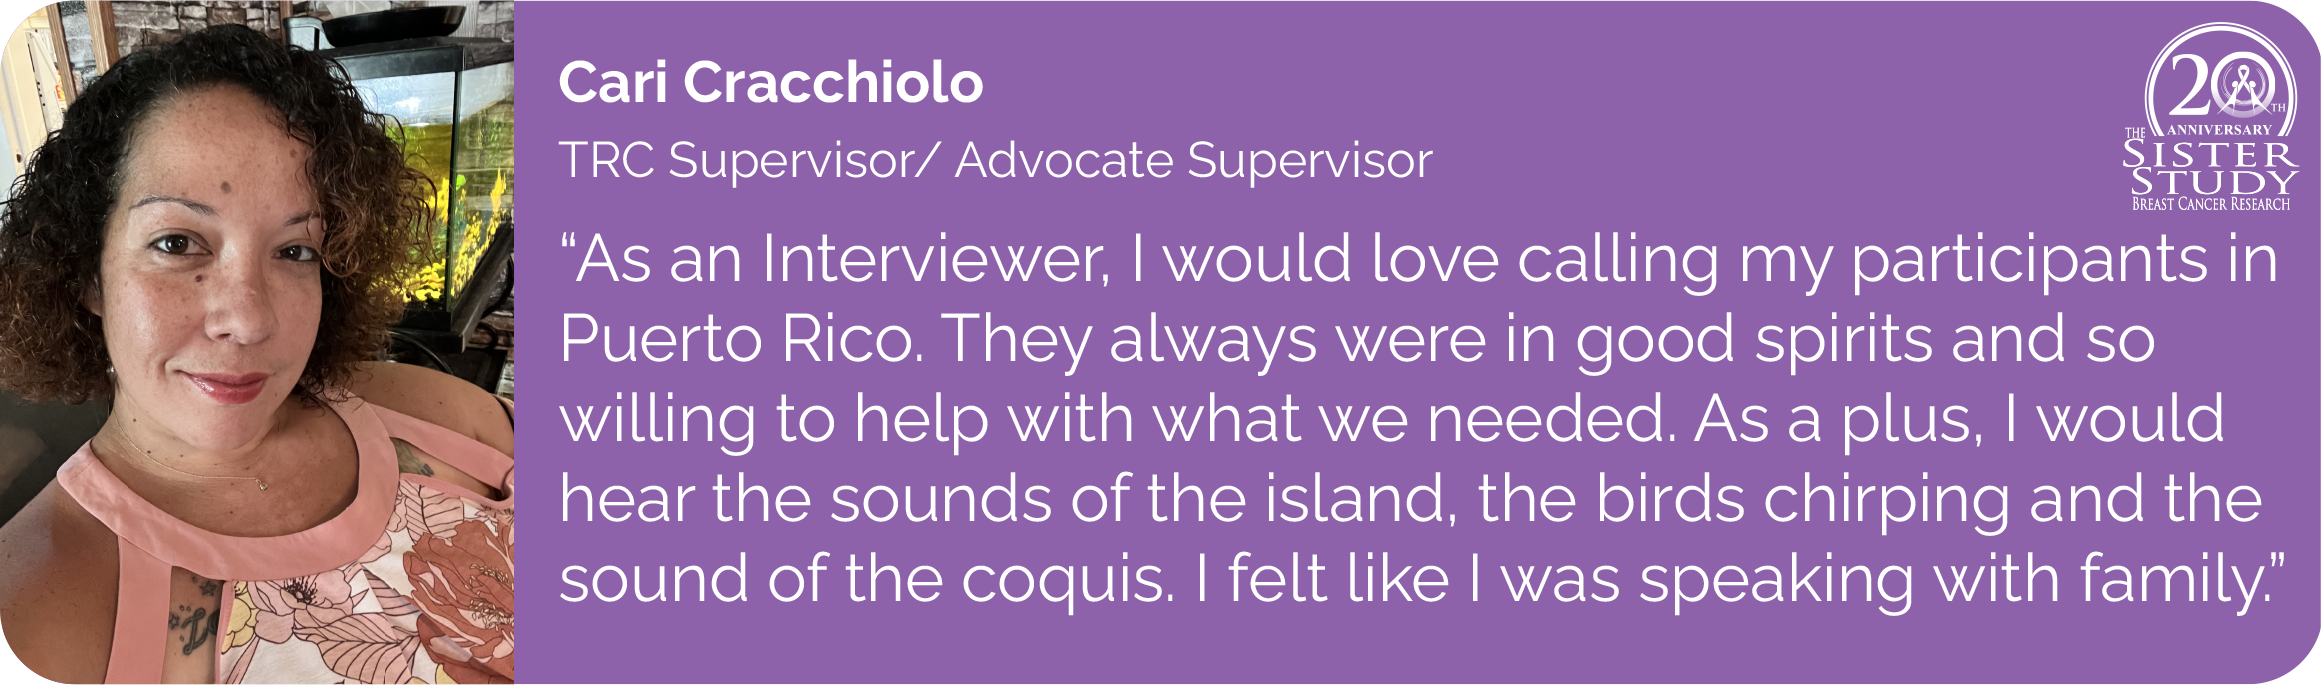 Cari Cracchiolo
TRC Supervisor/ Advocate Supervisor
- As an Interviewer, I would love calling my participants in
Puerto Rico. They always were in good spirits and so
willing to help with what we needed. As a plus, I would
hear the sounds of the island, the birds chirping and the
sound of the coquis. I felt like I was speaking with family.